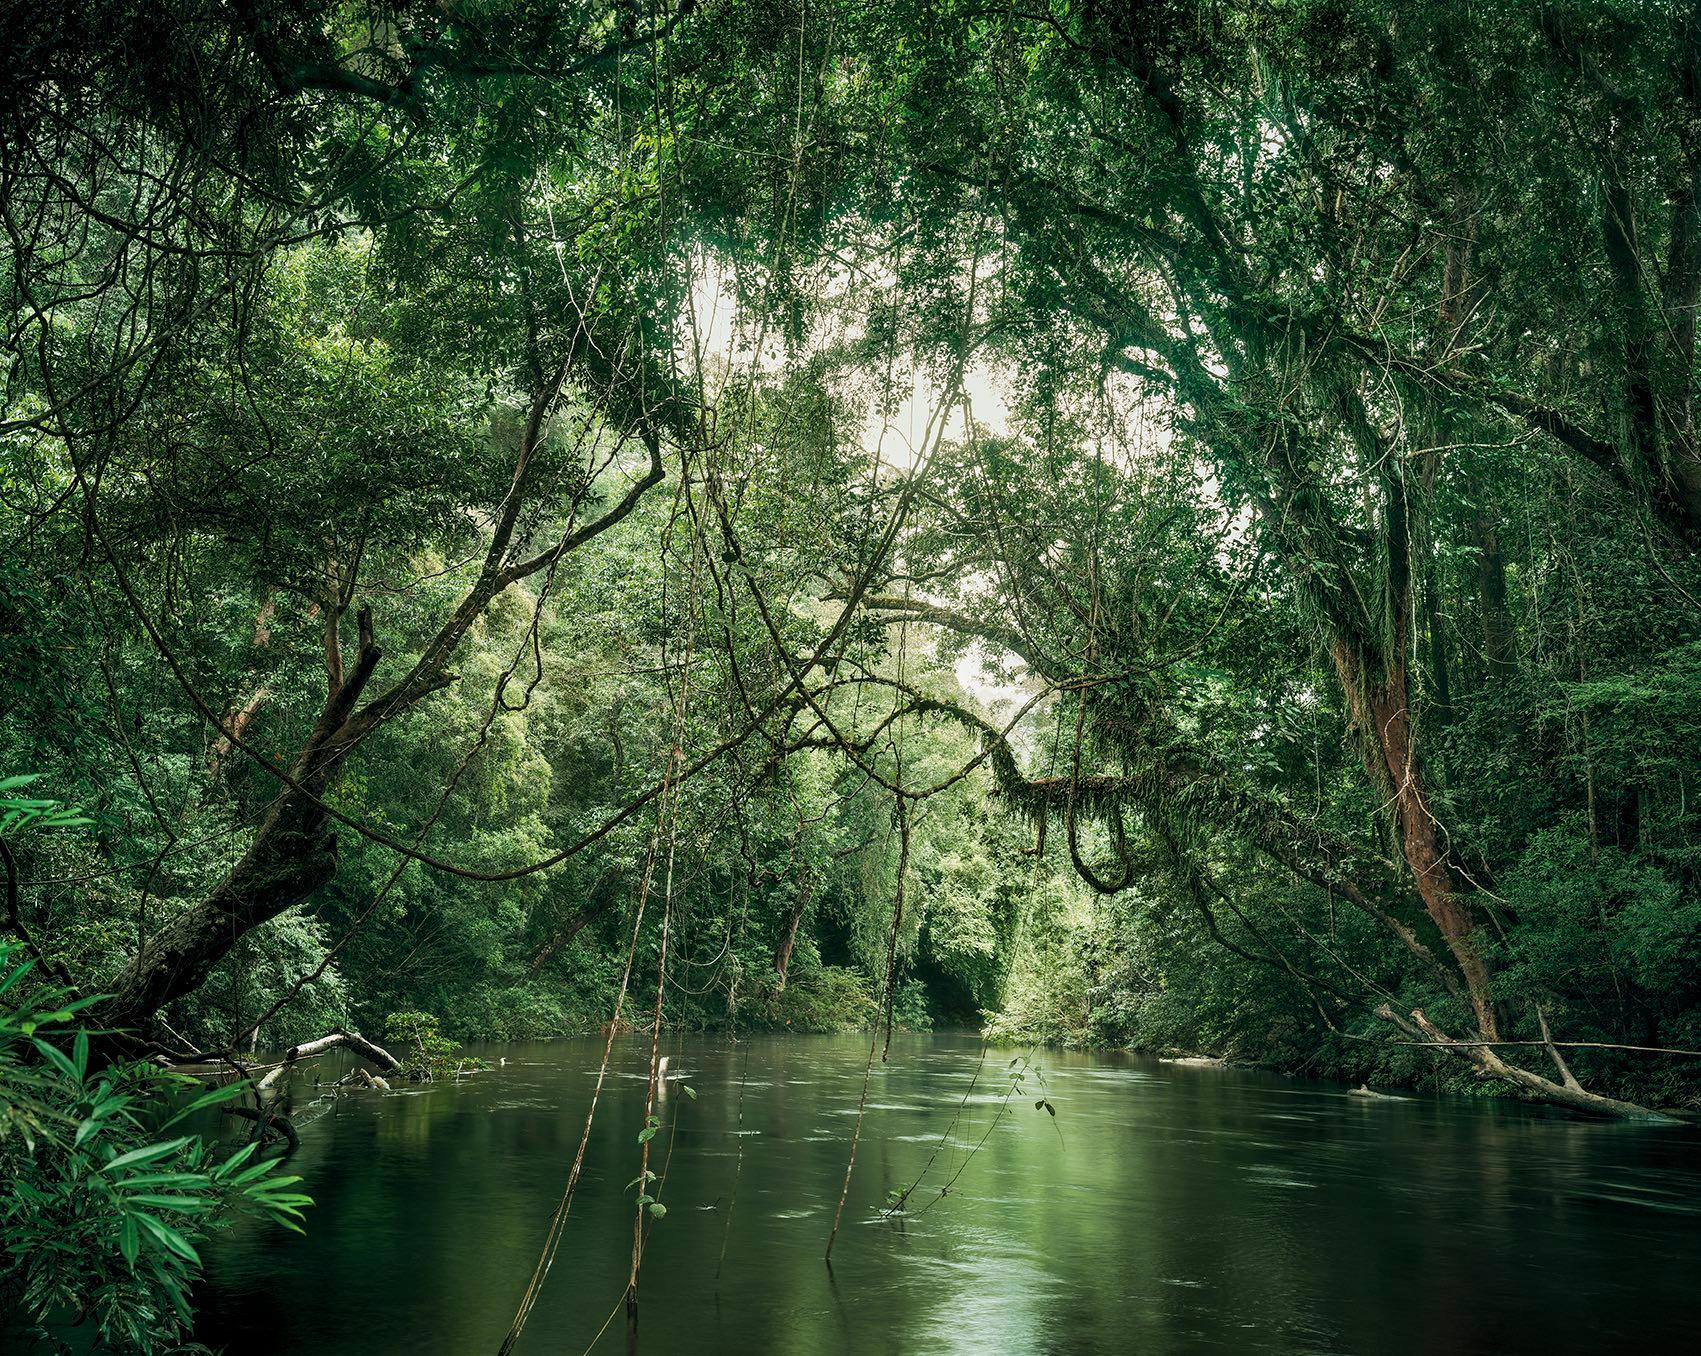 Primary Forest 1, Waterway, Malaysia 11/2013
Olaf Otto Becker
Signed on reverse
Archival pigment print

Available in three sizes:
24 3/4 x 29 1/2 inches – edition of 6
43 1/2 x 54 1/4 inches – edition of 6
58 3/4 x 71 inches – edition of 2

Ever